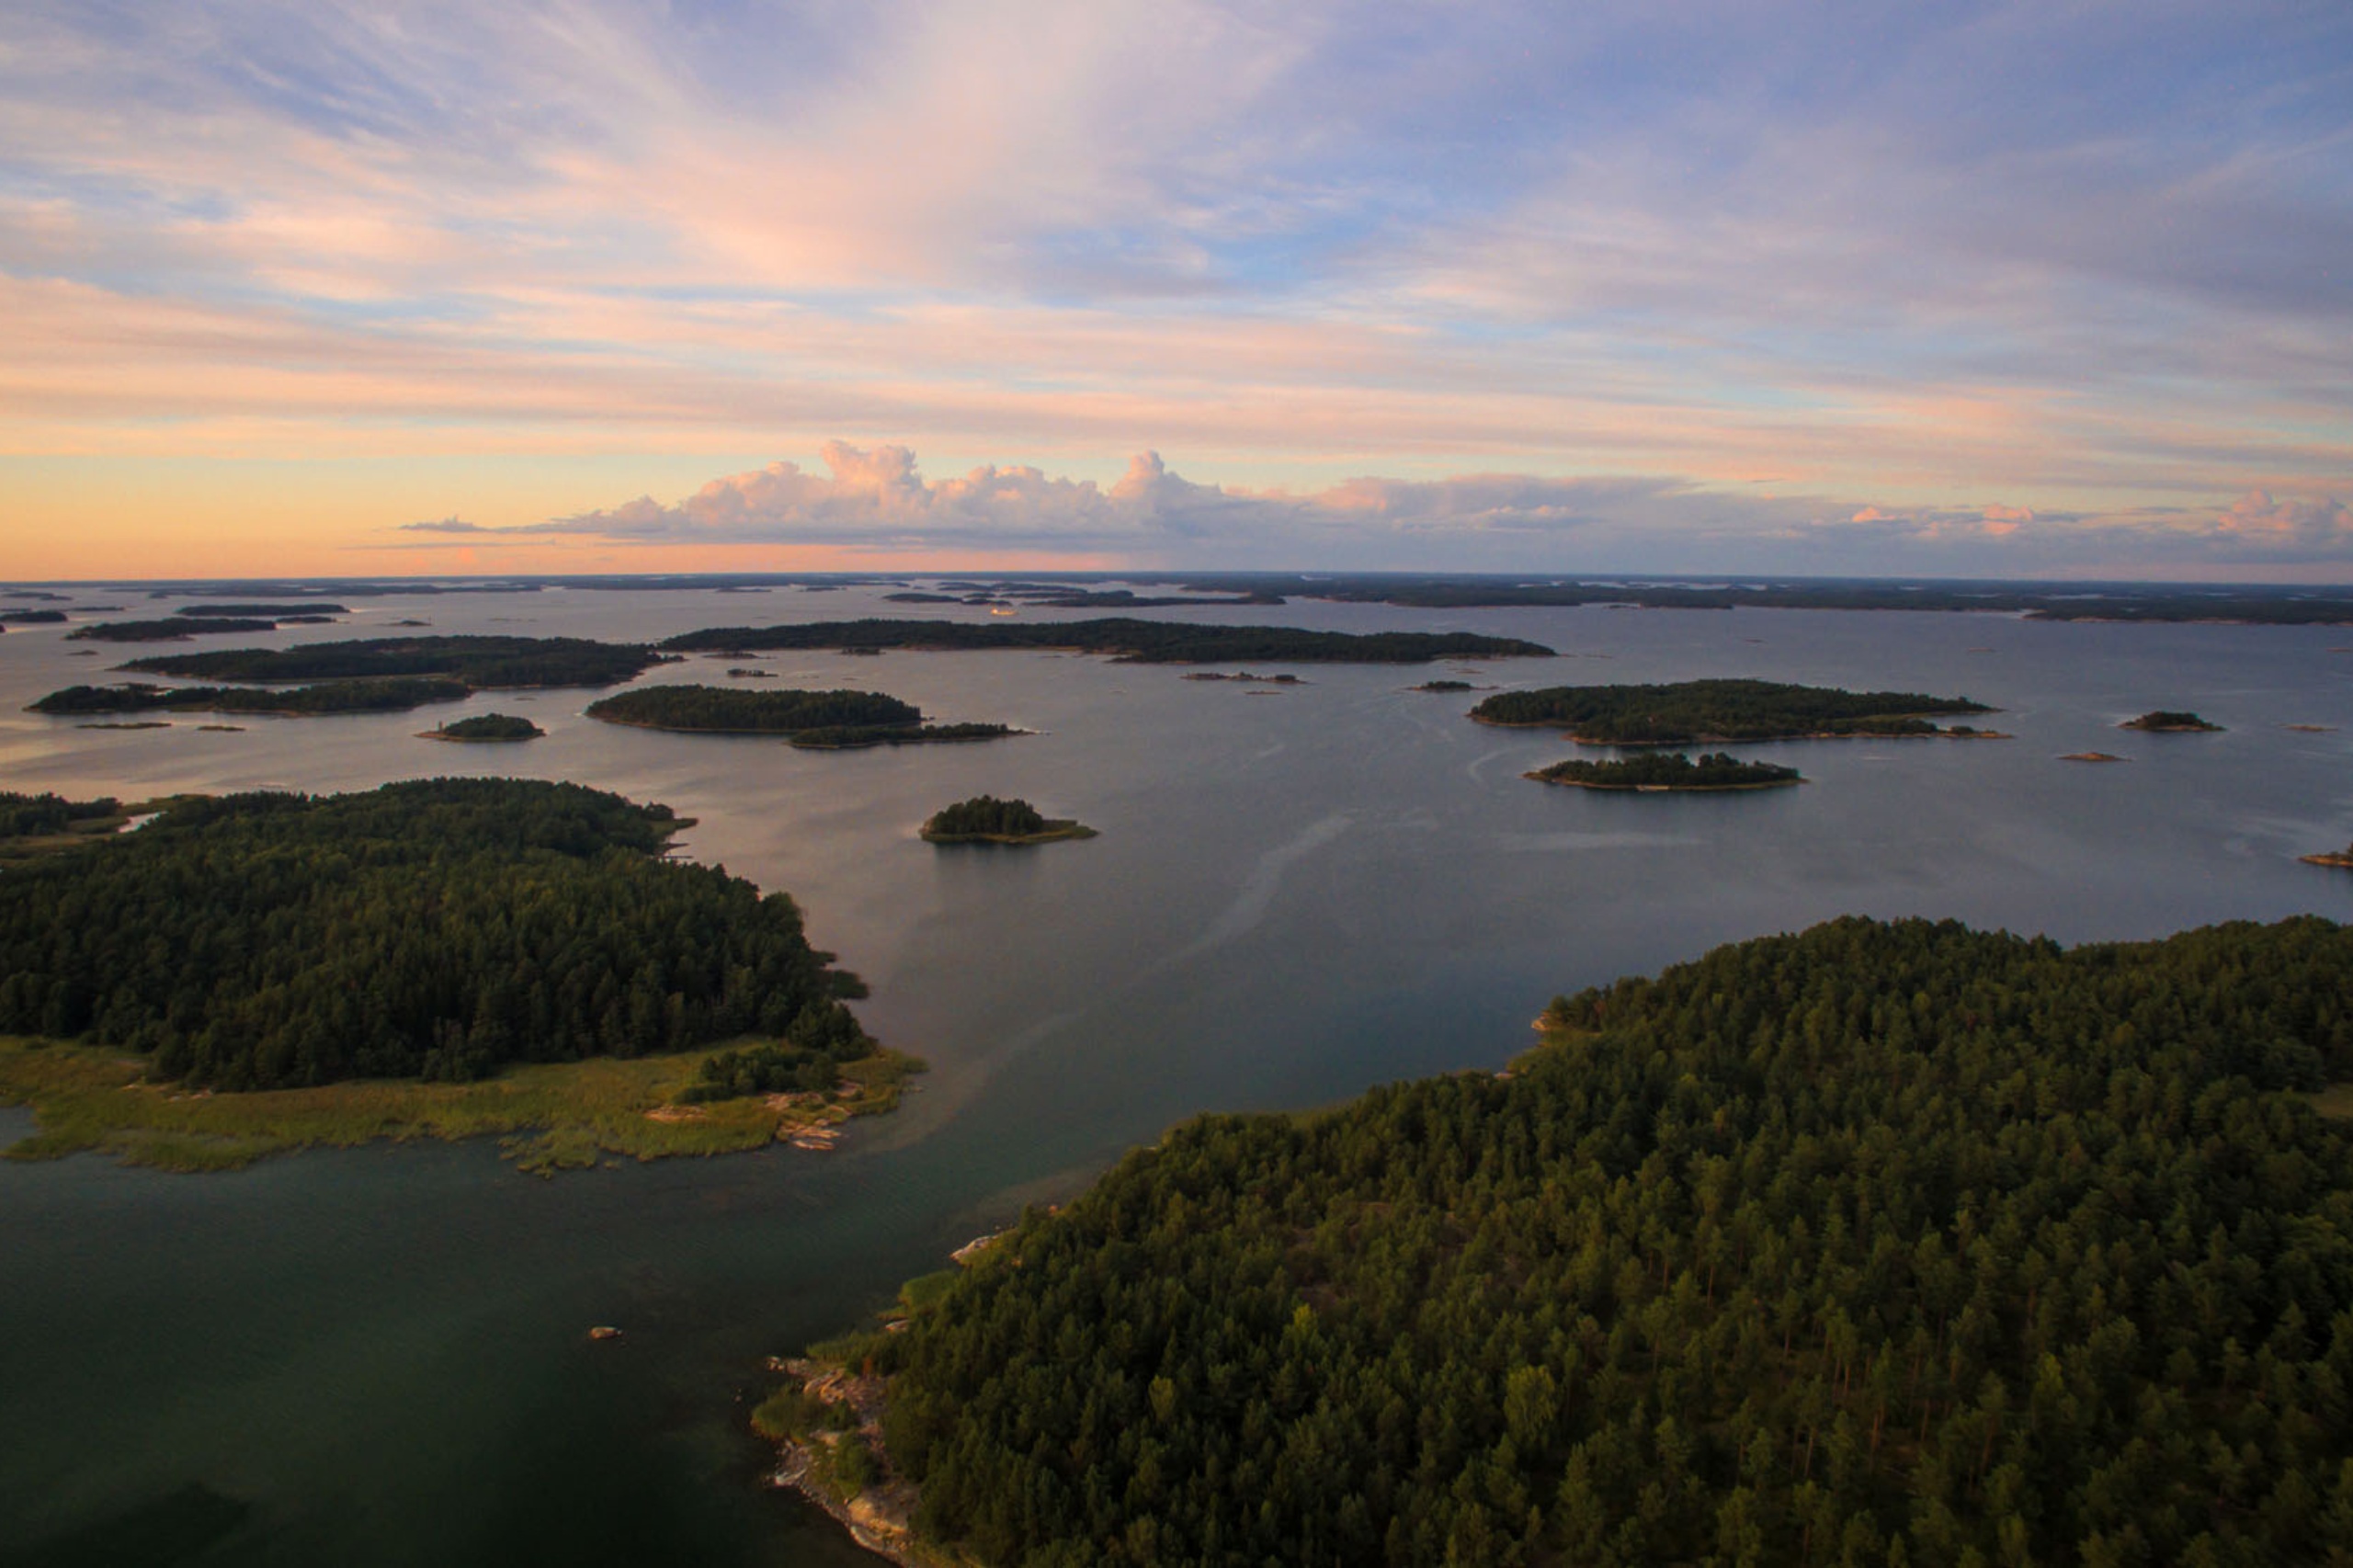  Finland has a huge archipelago of more than 80,000 islands, one of which is home to the Mossala Island Resort. 